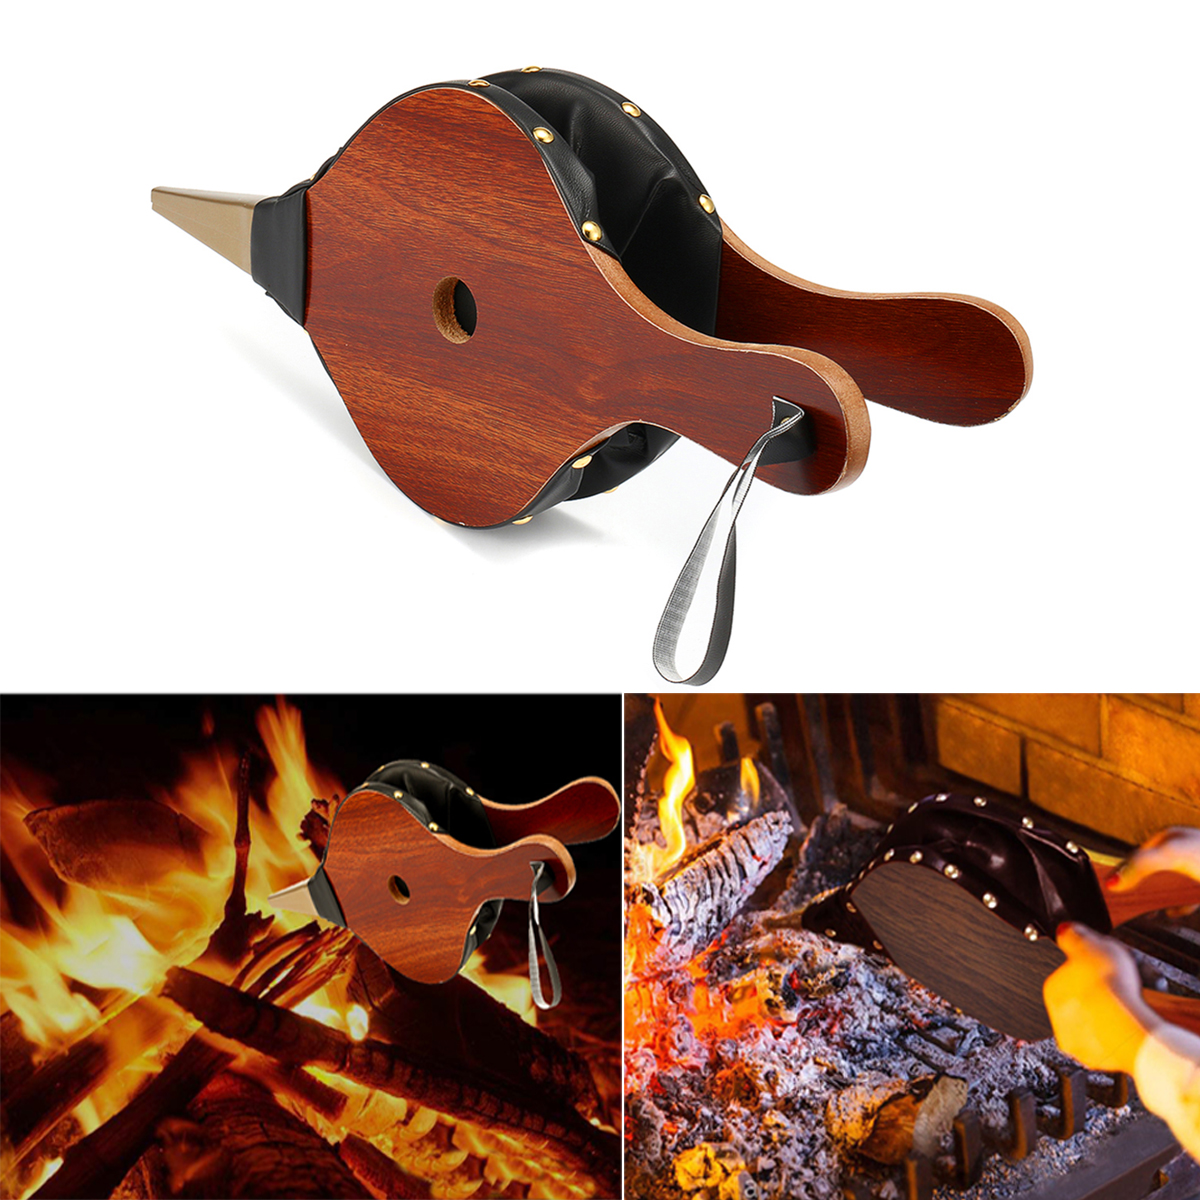 

Outdoor Wood Fireplace Hand Barbecue BBQ Air Fire Blower Cooking Stove Bellows Camping Picnic